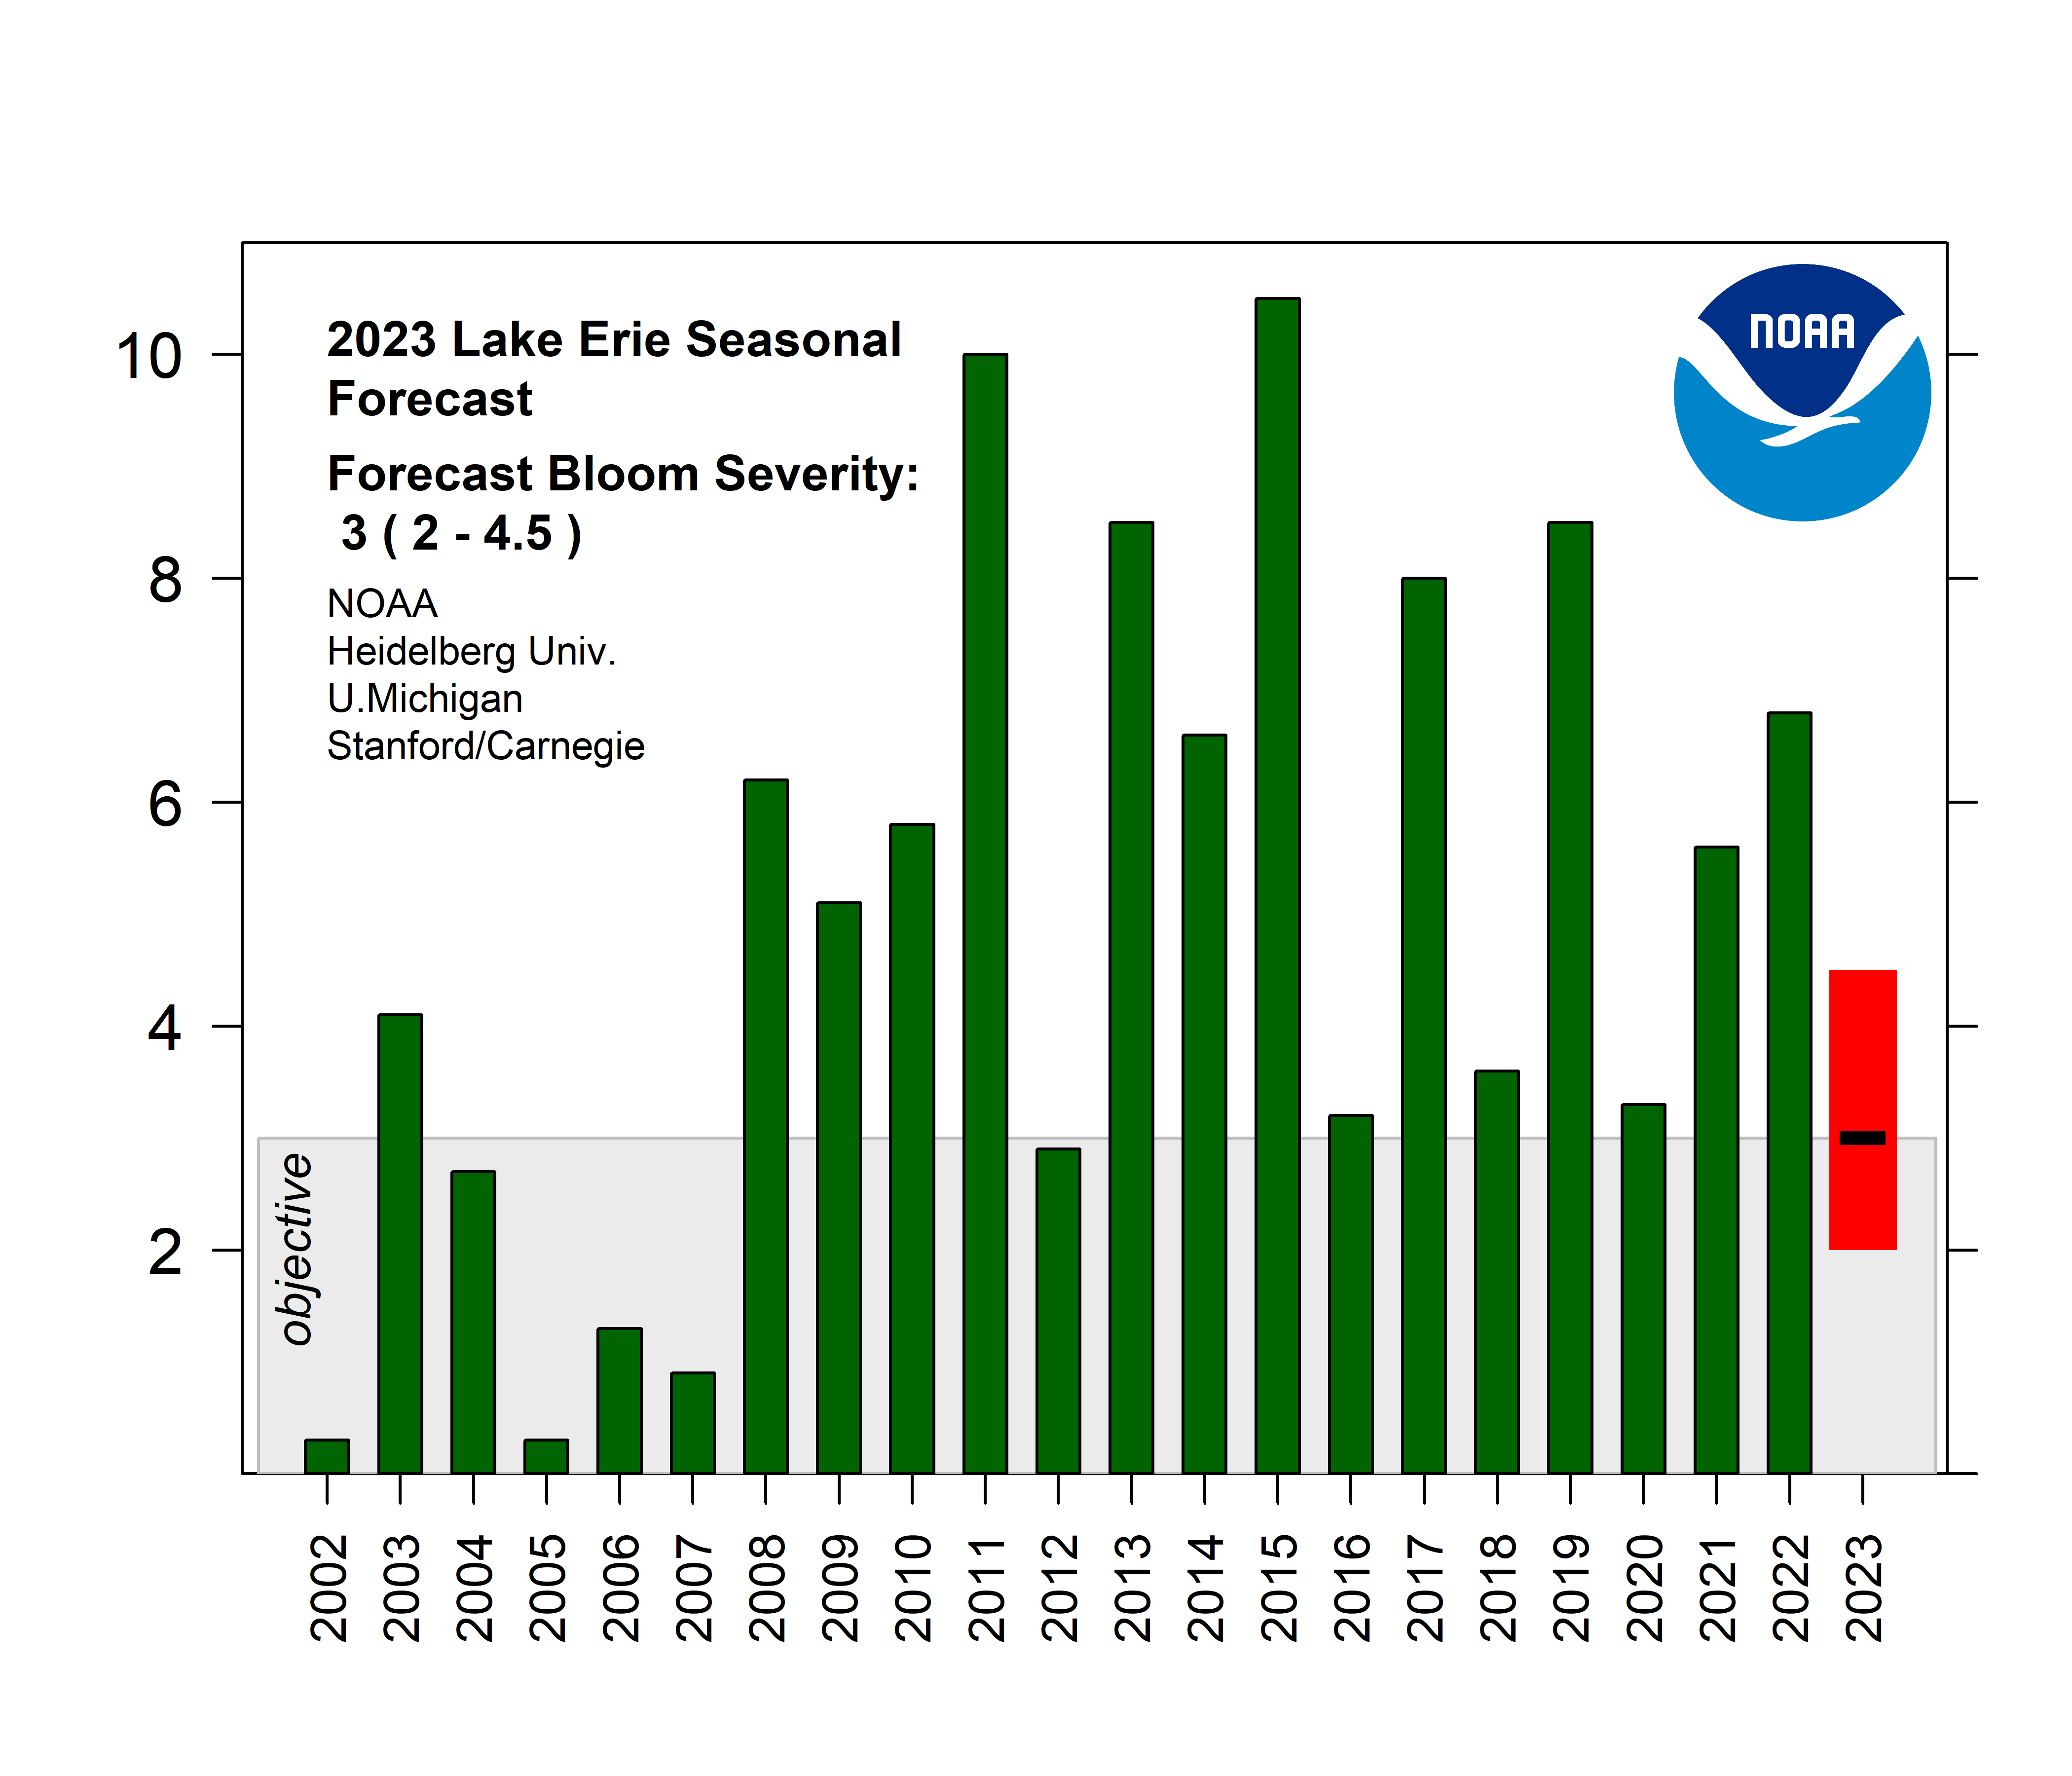 Graph showing bloom severity forecast compared to previous years. The wide red bar is the likely range of severity based on the different models used and reflect uncertainty in the July total bioavailable phosphorus (TBP) load. A severity below 3 is the goal of the Great Lakes Water Quality Agreement 